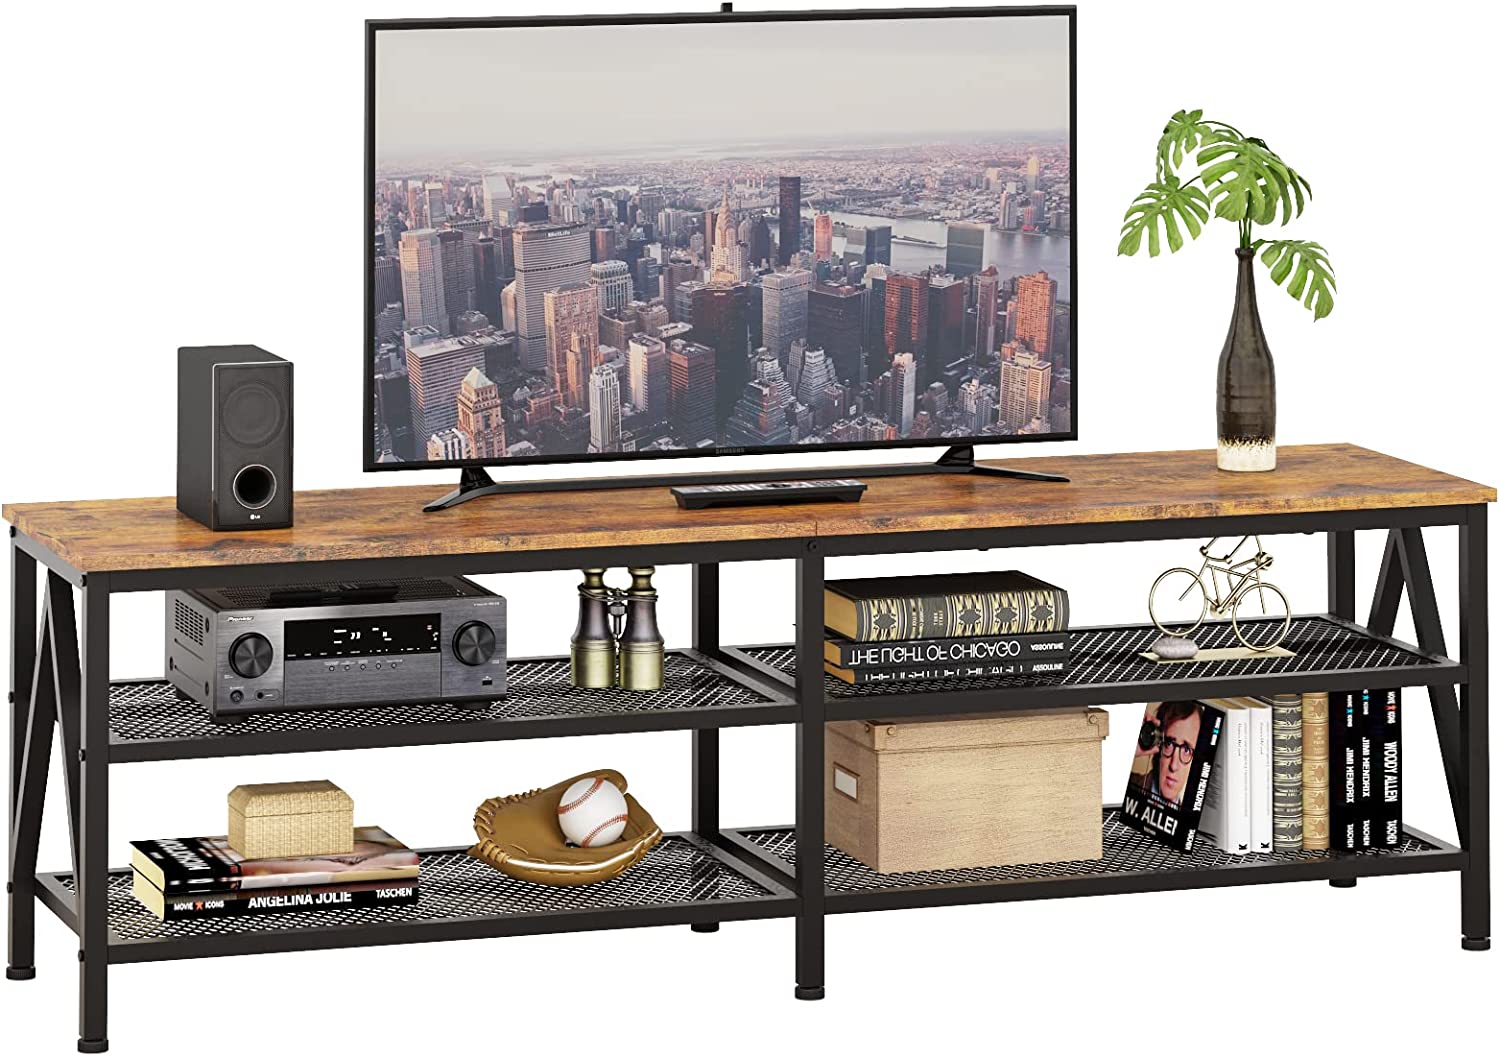 TV Cabinet with 3-Tier Storage Shelves Living Room Decor - 40% Off Buy Now